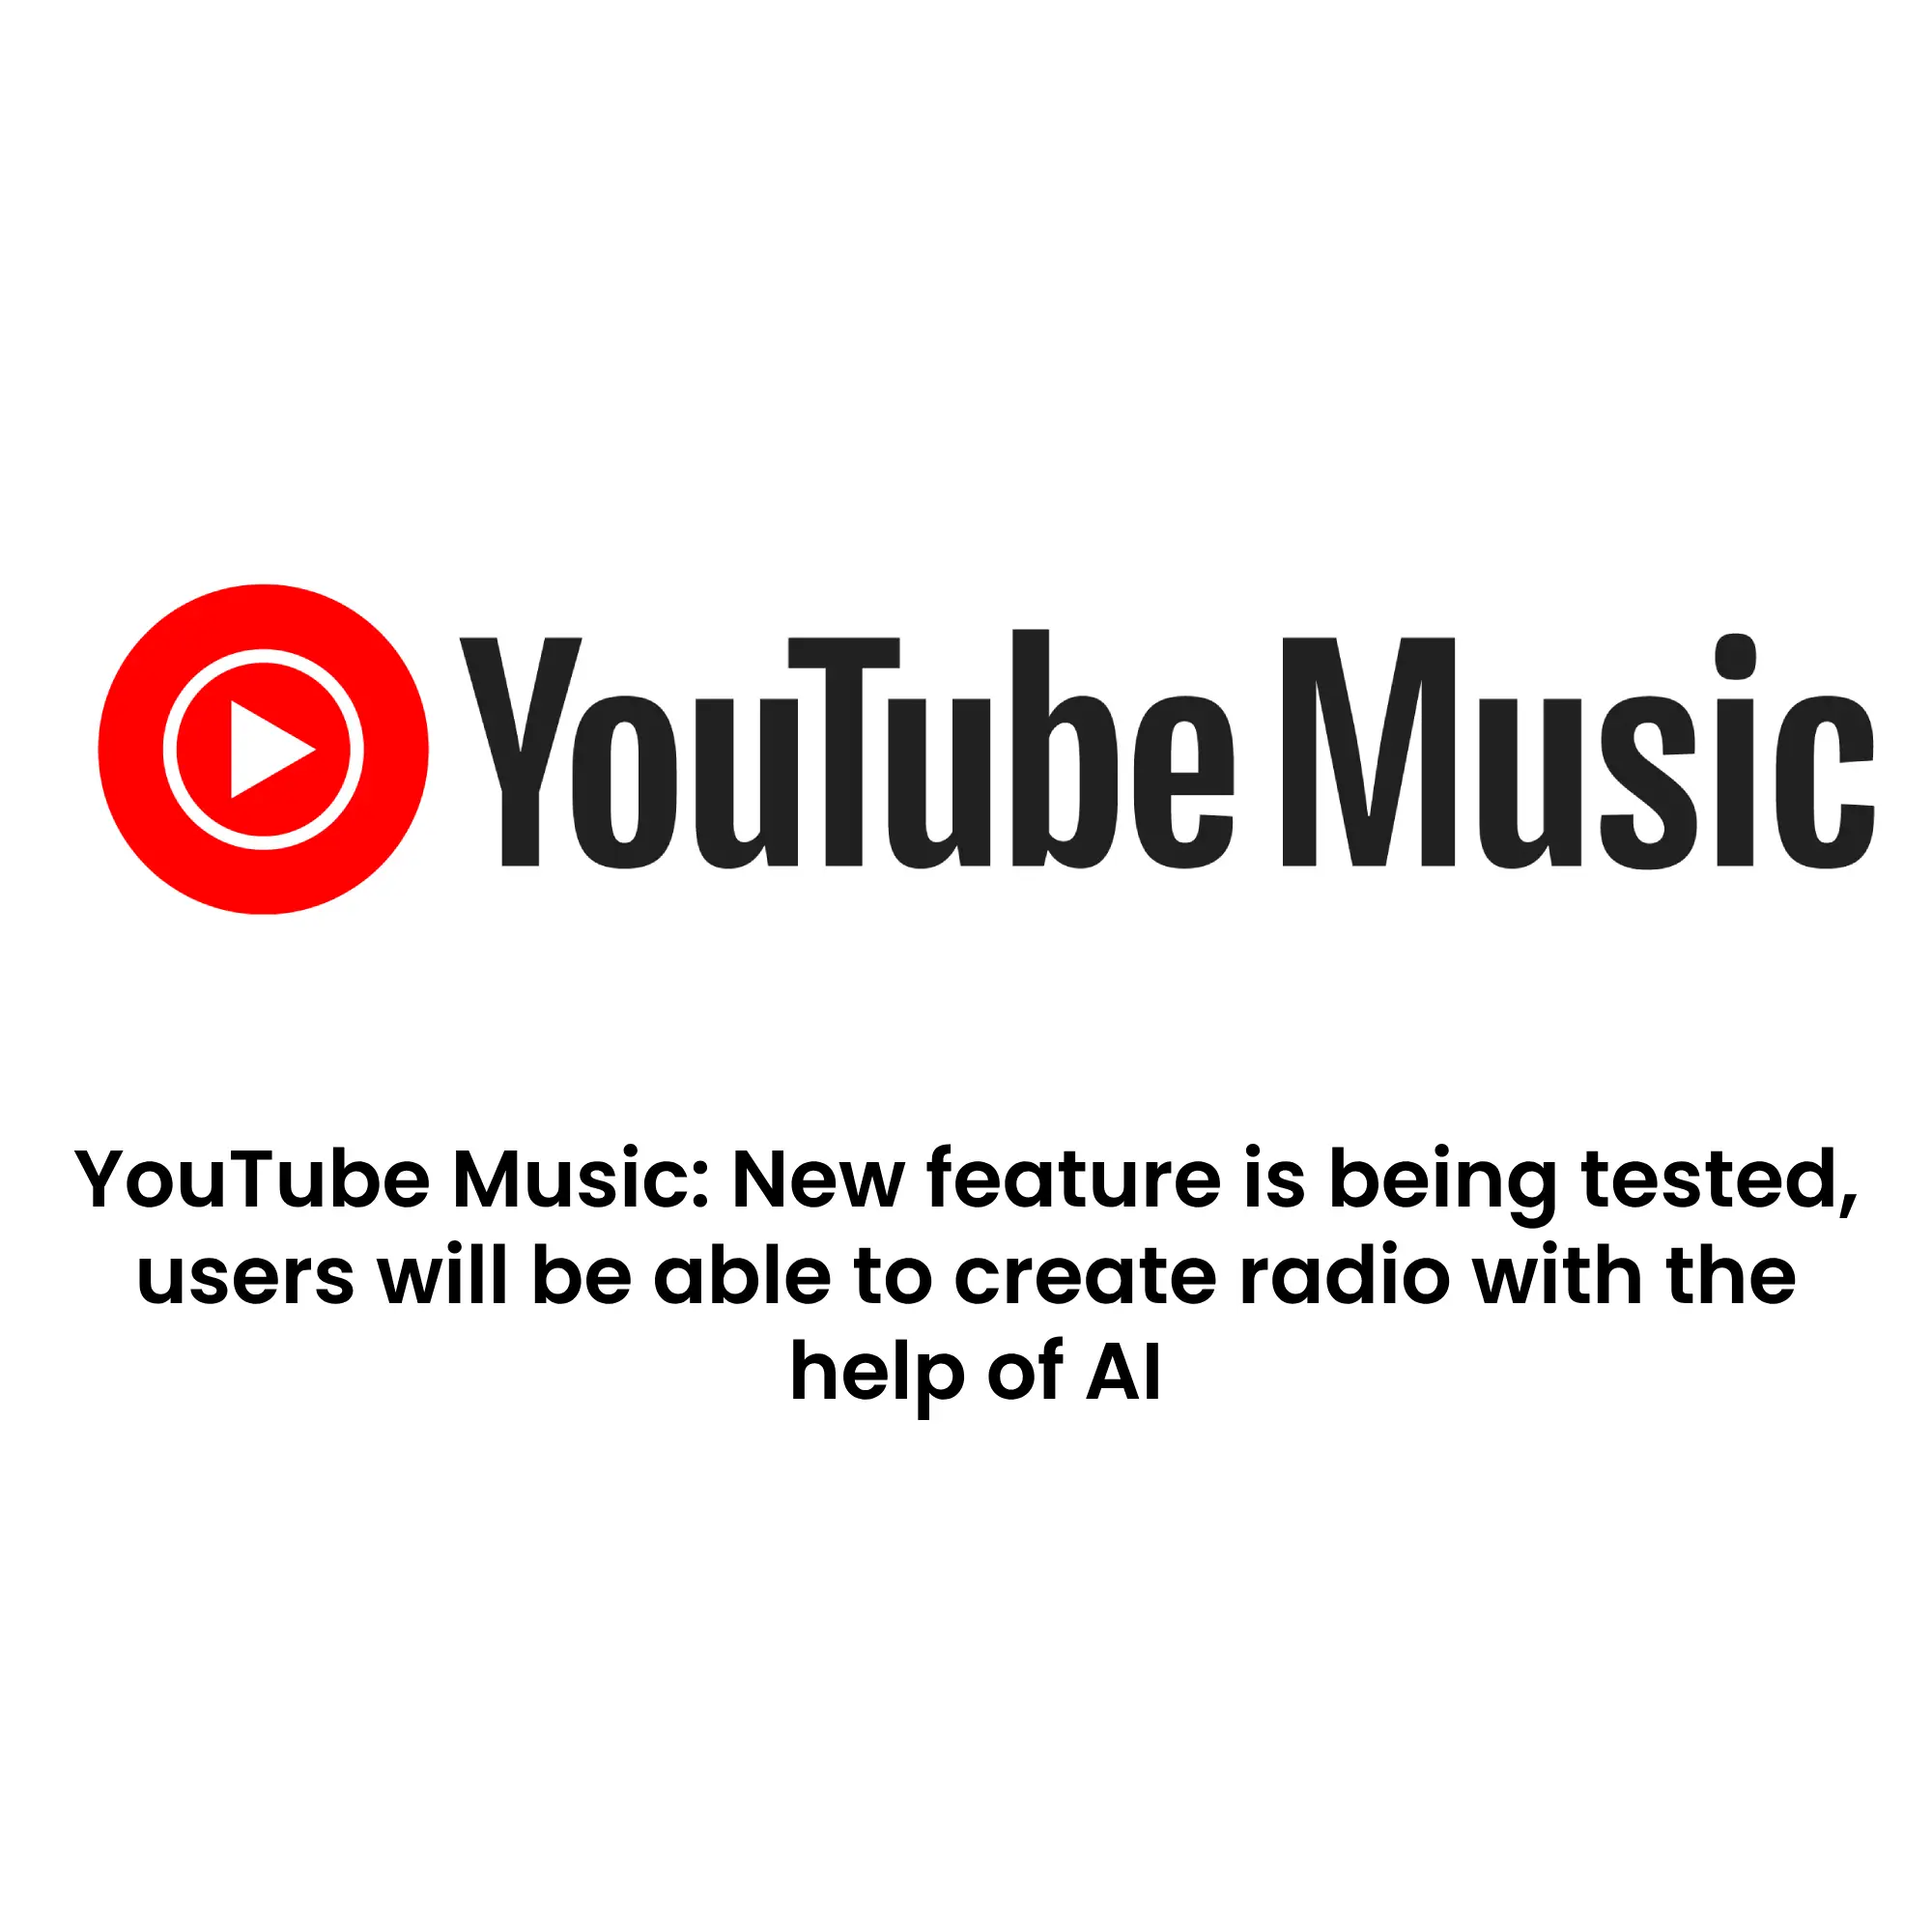 YouTube Music New feature is being tested, users will be able to create radio with the help of AI